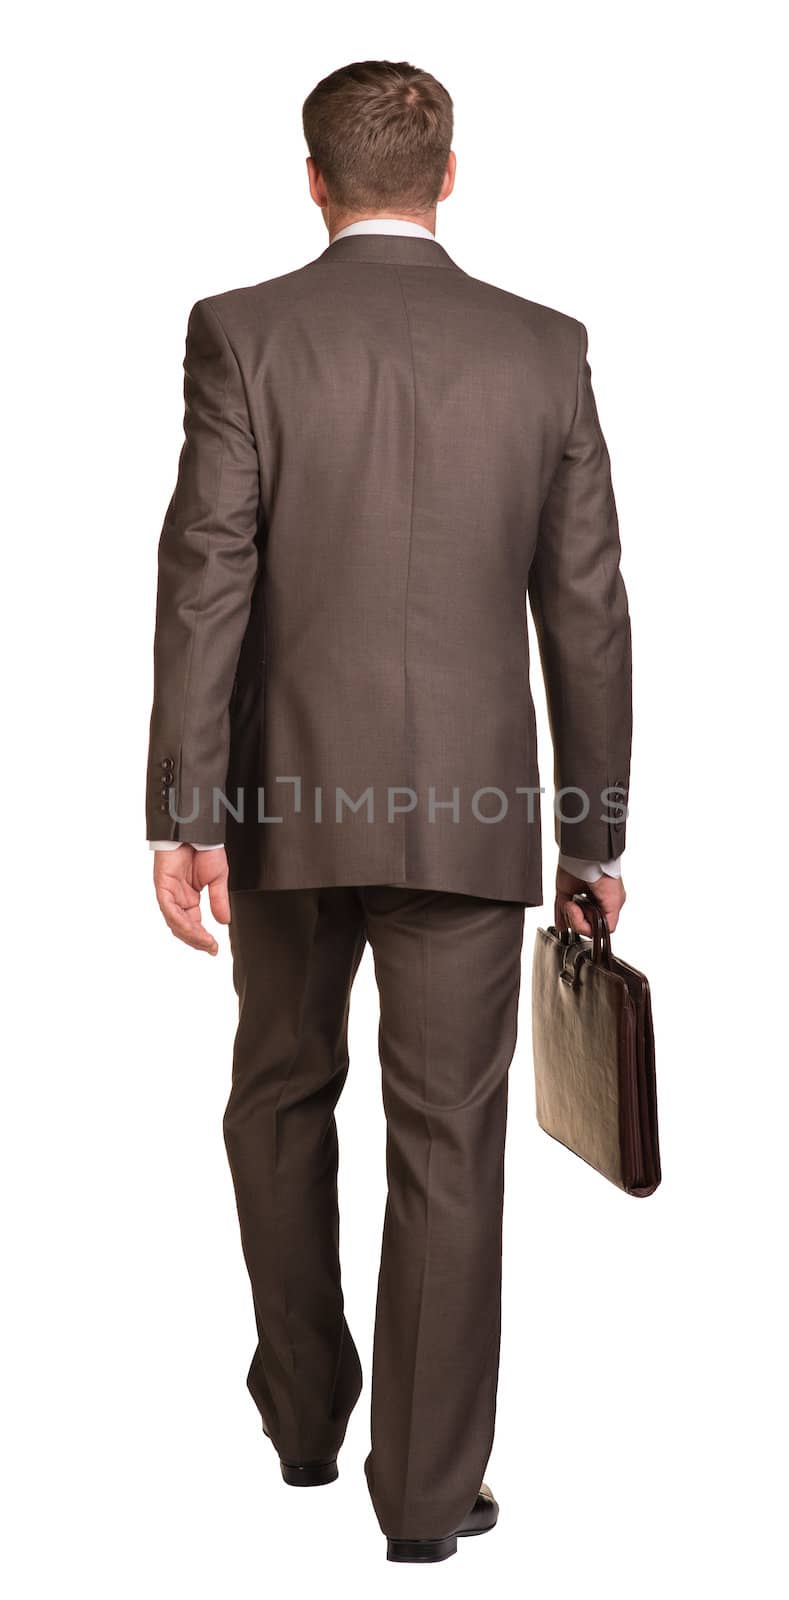 Walking businessman with briefcase. Rear view. Isolated on the white background.